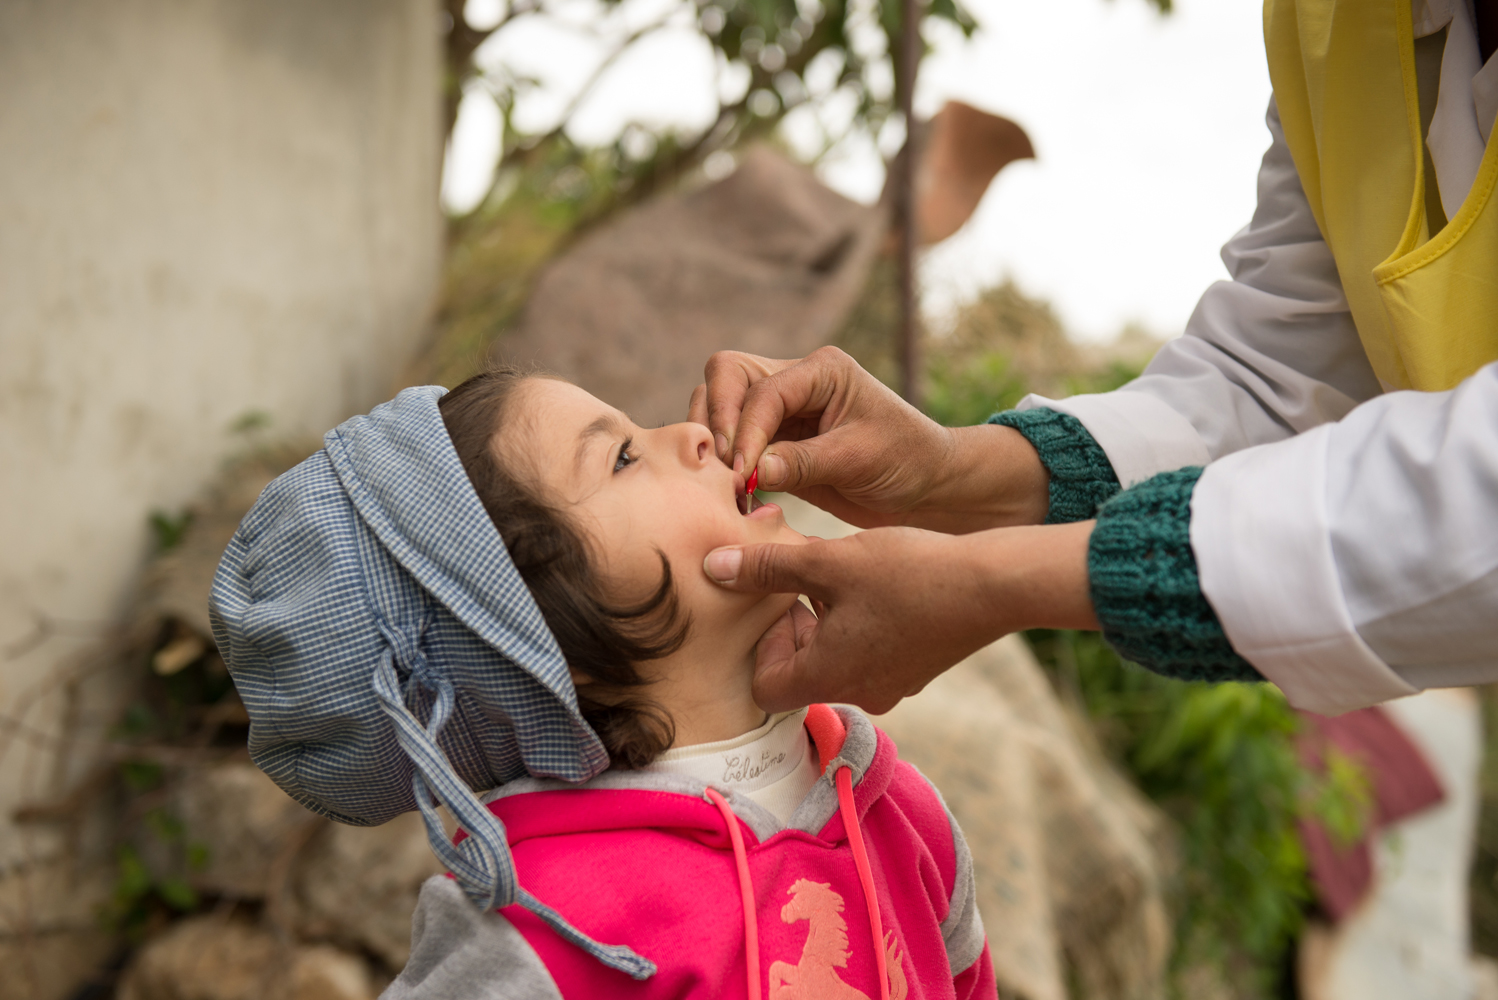 A young girl receives a vaccination from a health worker